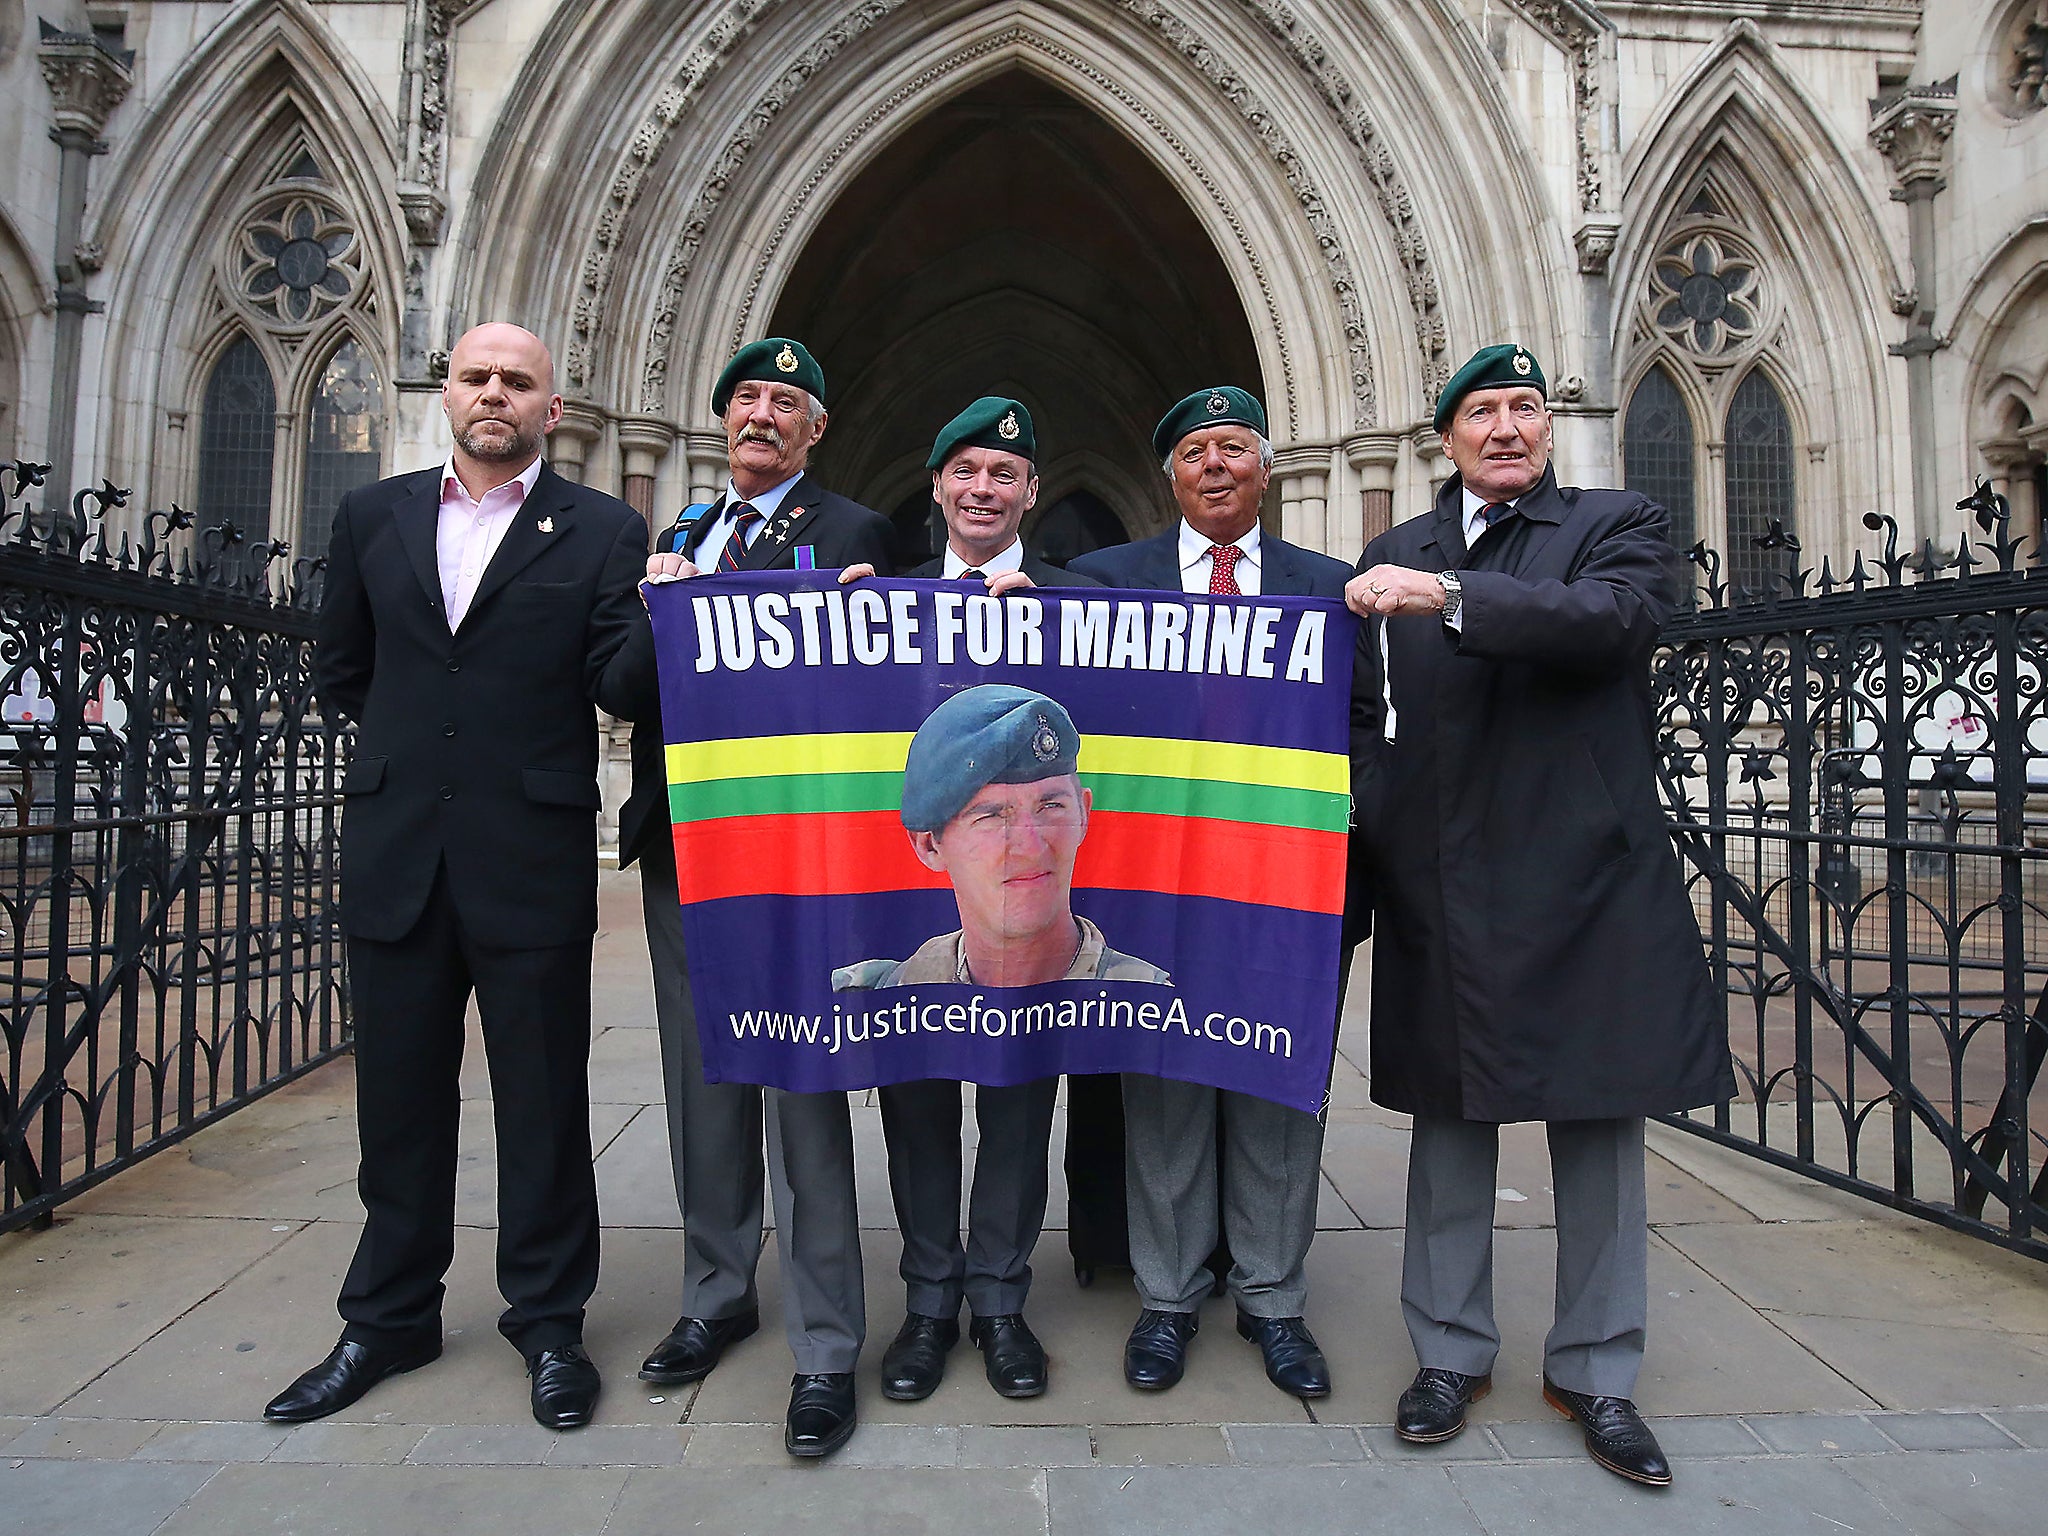 &#13;
Supporters of Sergeant Alexander Blackman outside the Royal Courts of Justice in London in 2016 &#13;